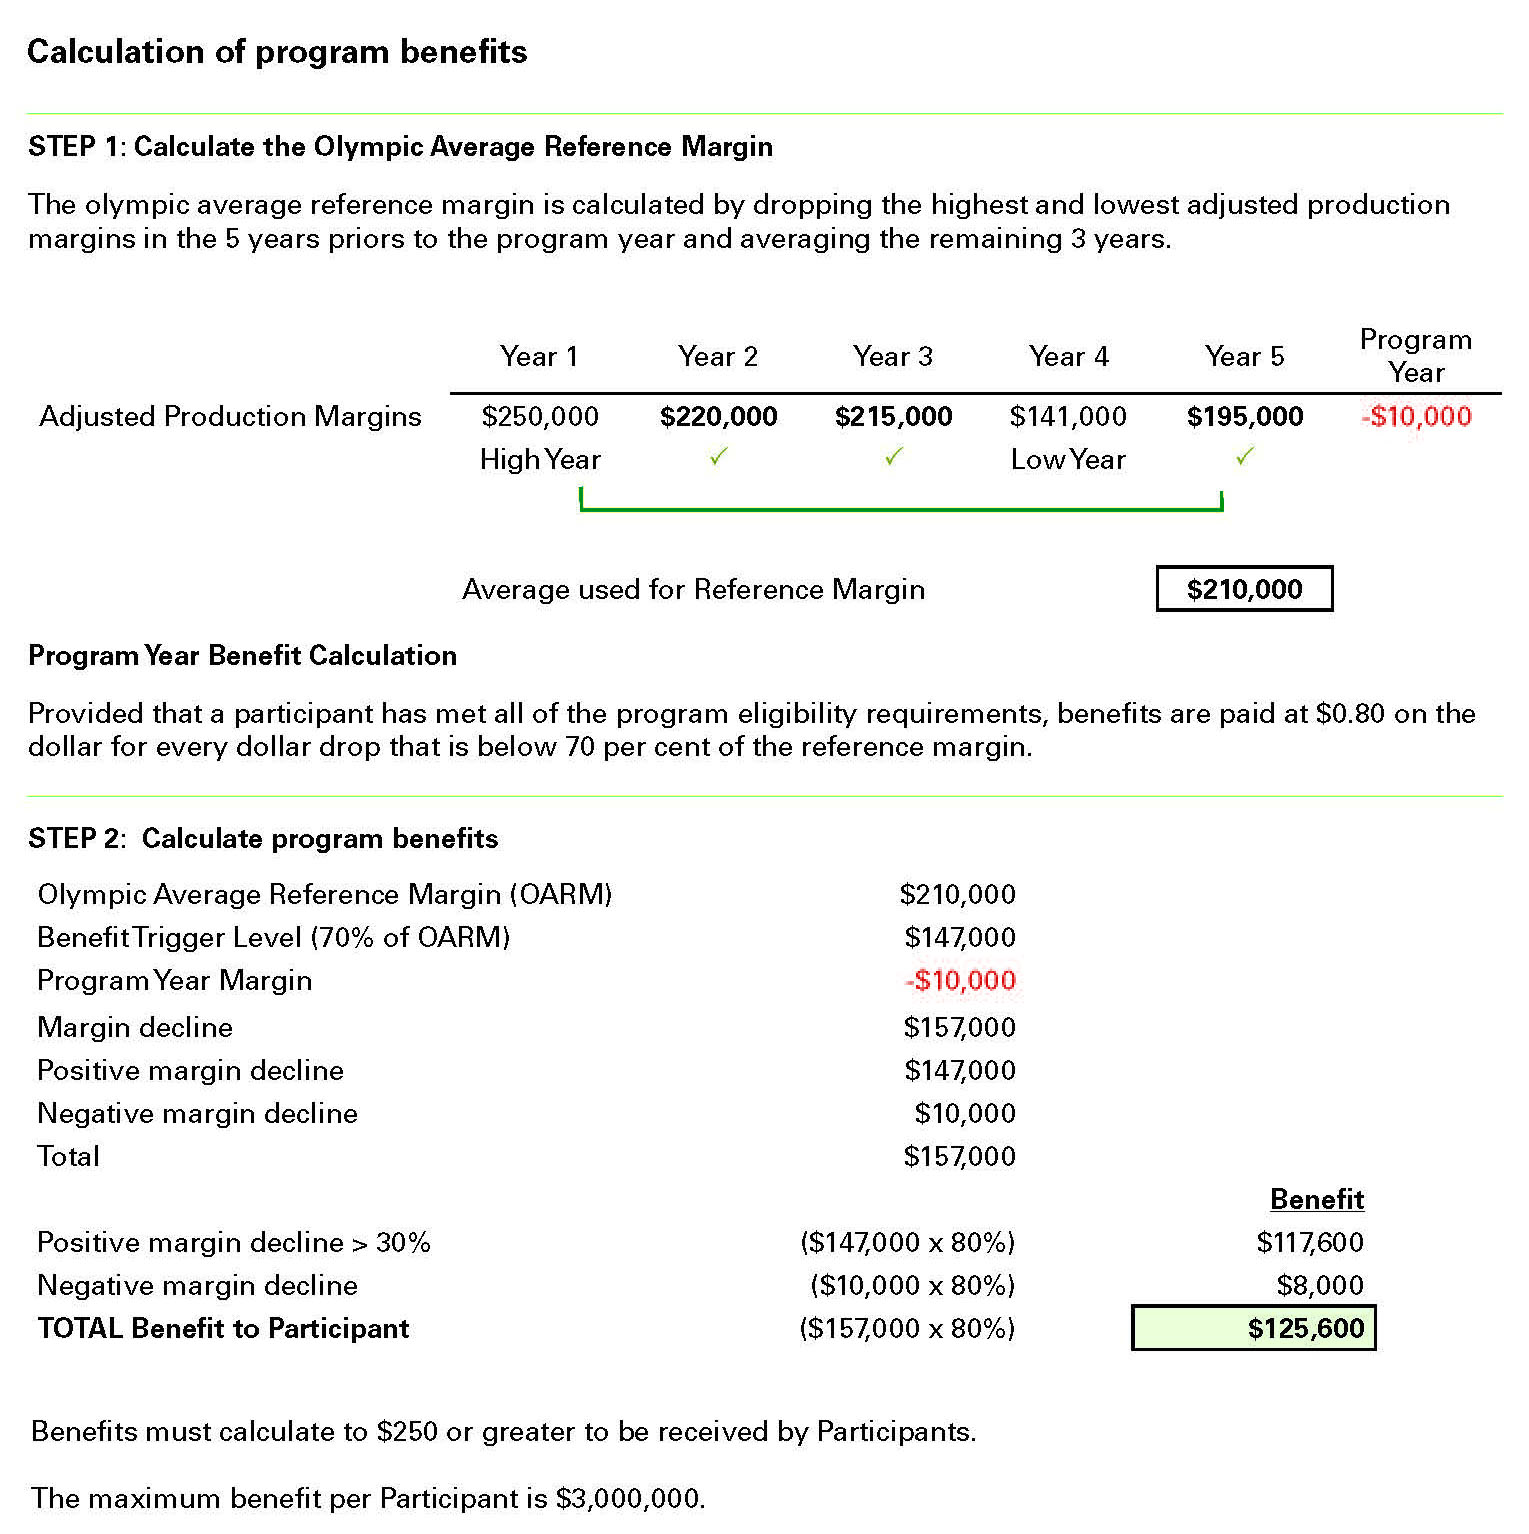 Calculation of program benefits example. Please call AFSC for details.